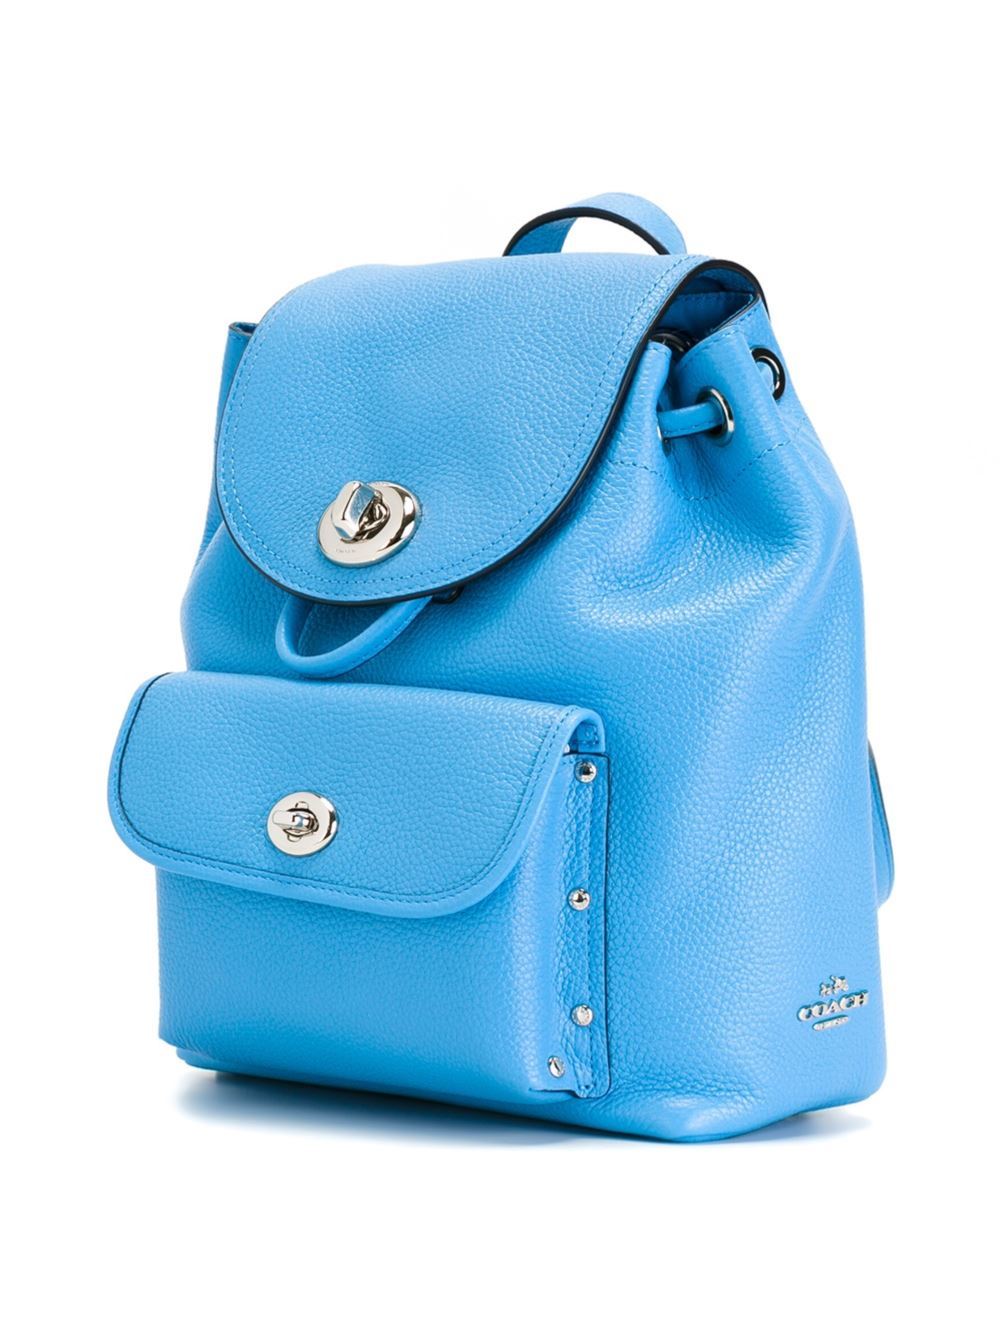 Lyst - Coach Small Flap Opening Backpack in Blue